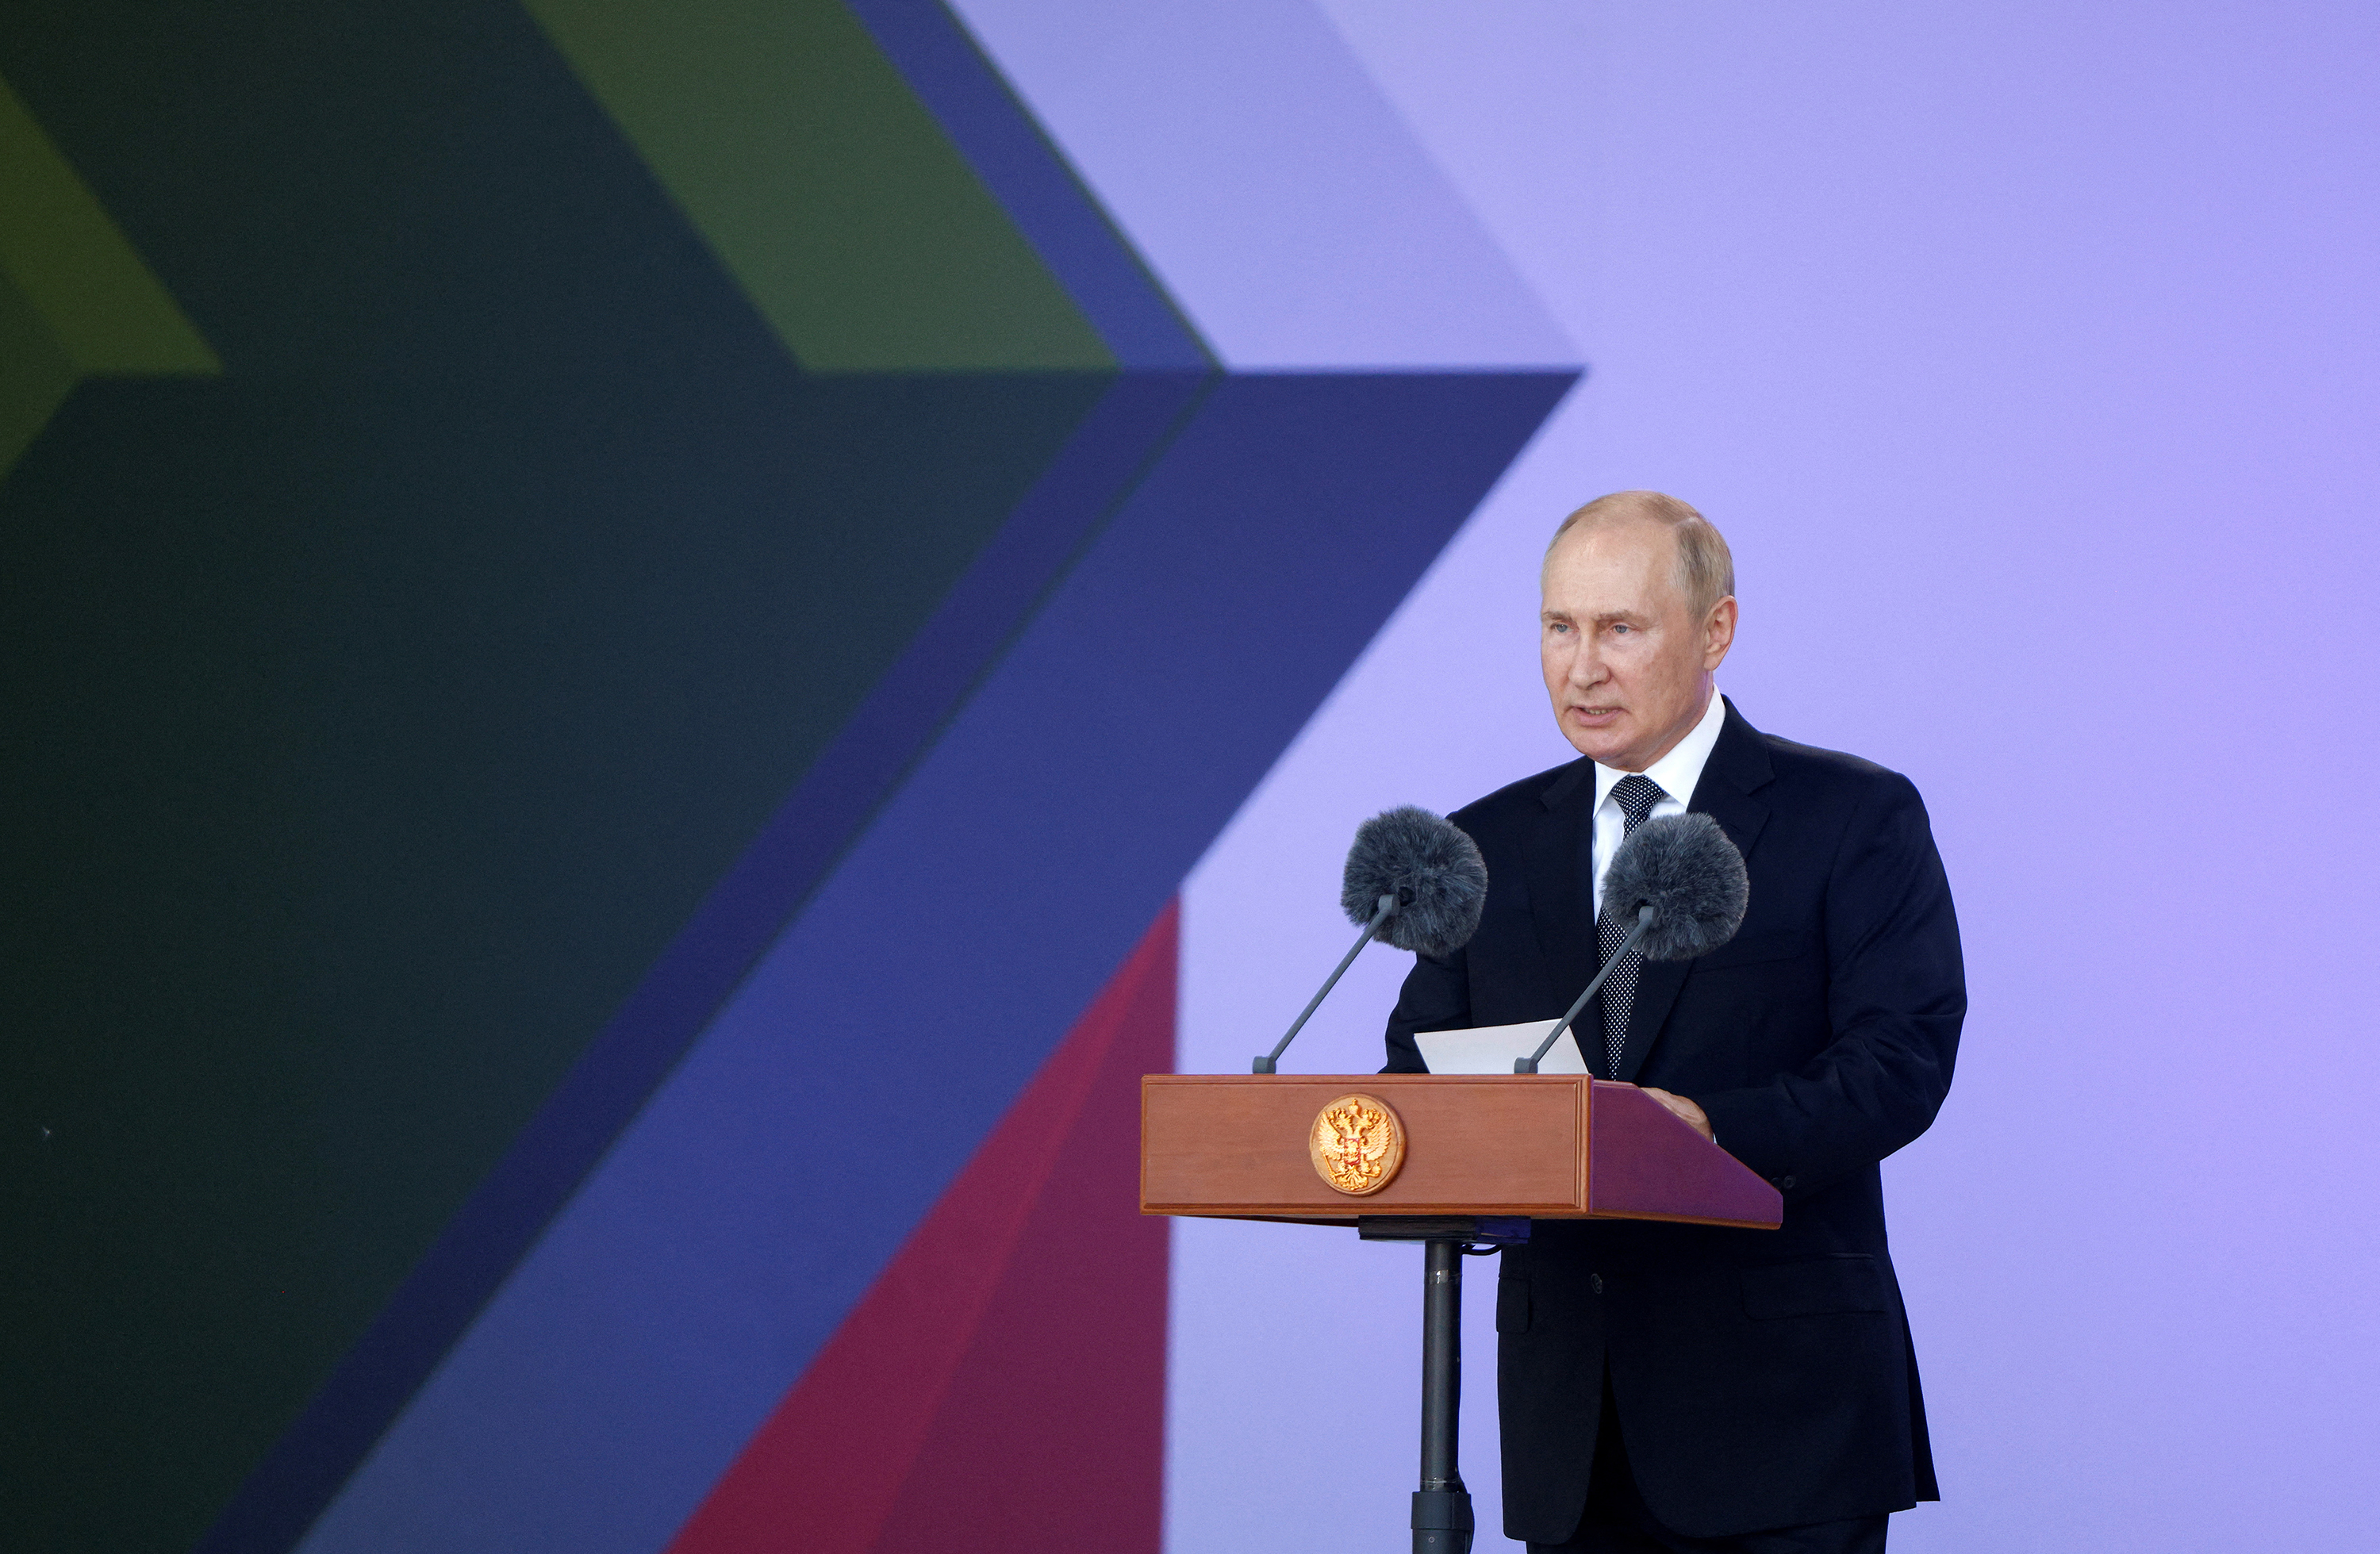 Russian President Vladimir Putin delivers a speech during a ceremony opening the international military-technical forum Army-2022 in the Moscow, Russia on August 15.